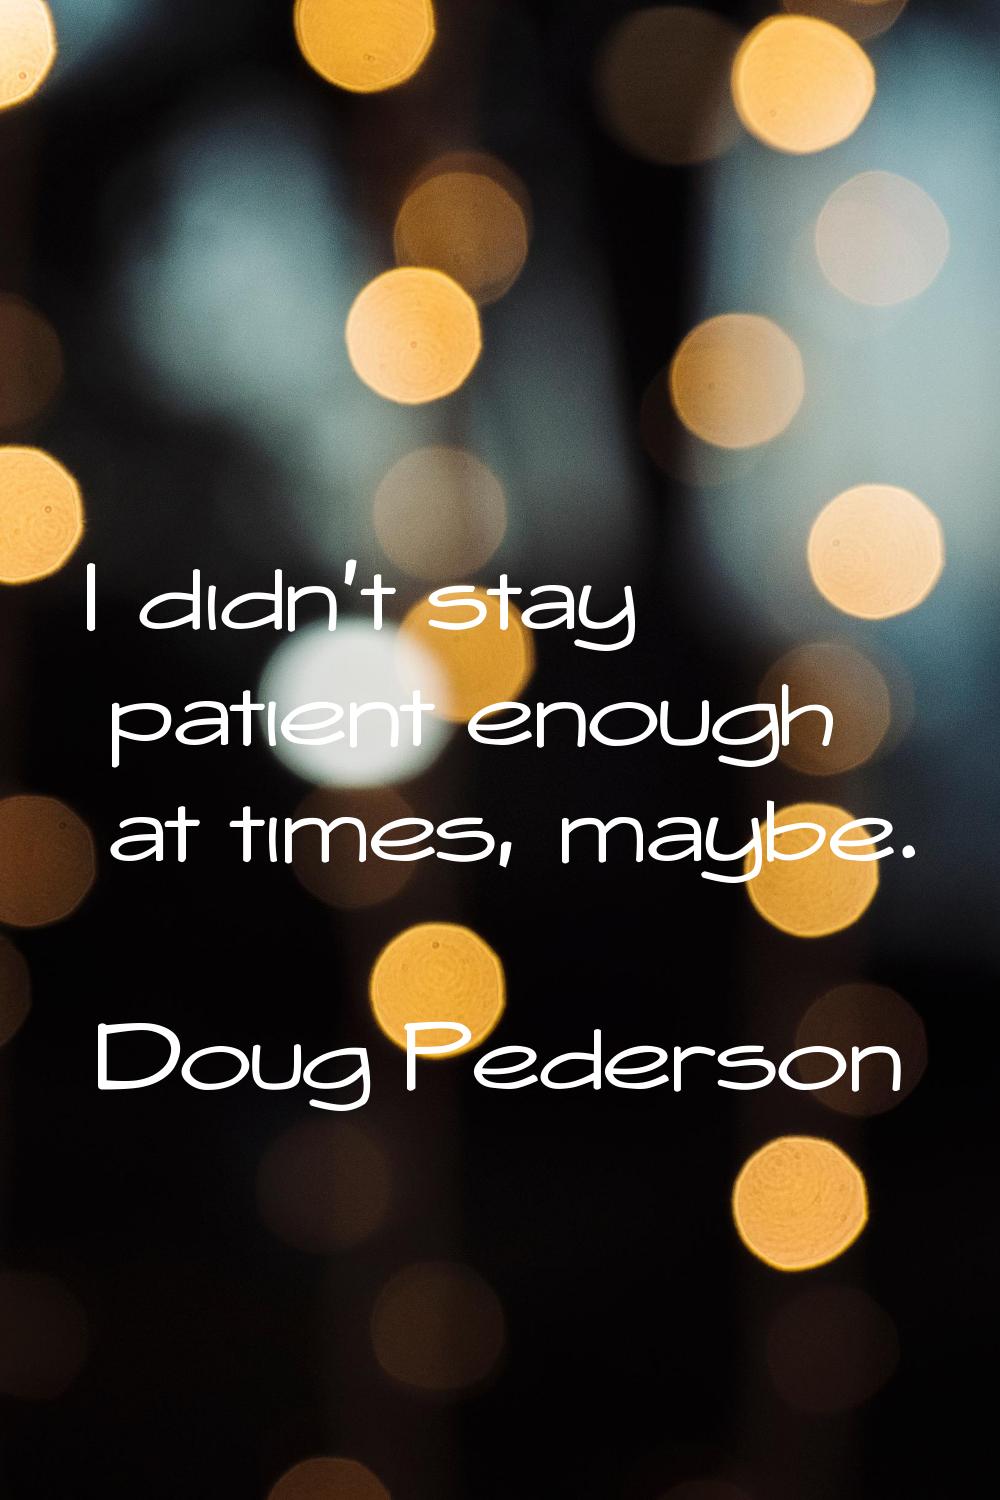 I didn't stay patient enough at times, maybe.